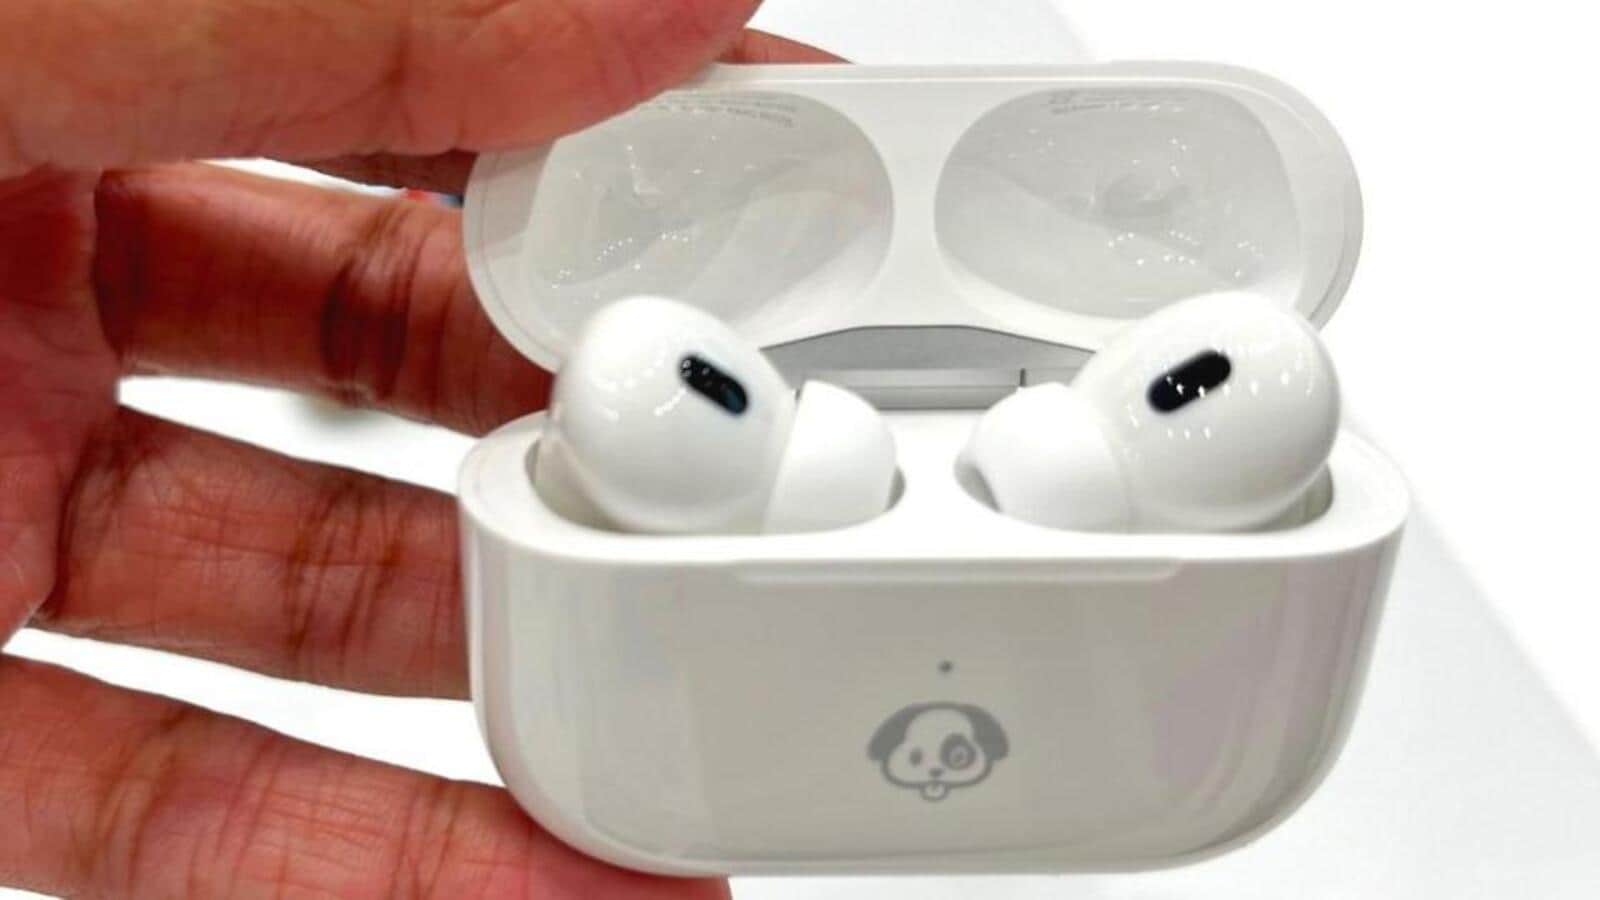 Apple AirPods Pro’s second gen is more about the same, yet better in every way